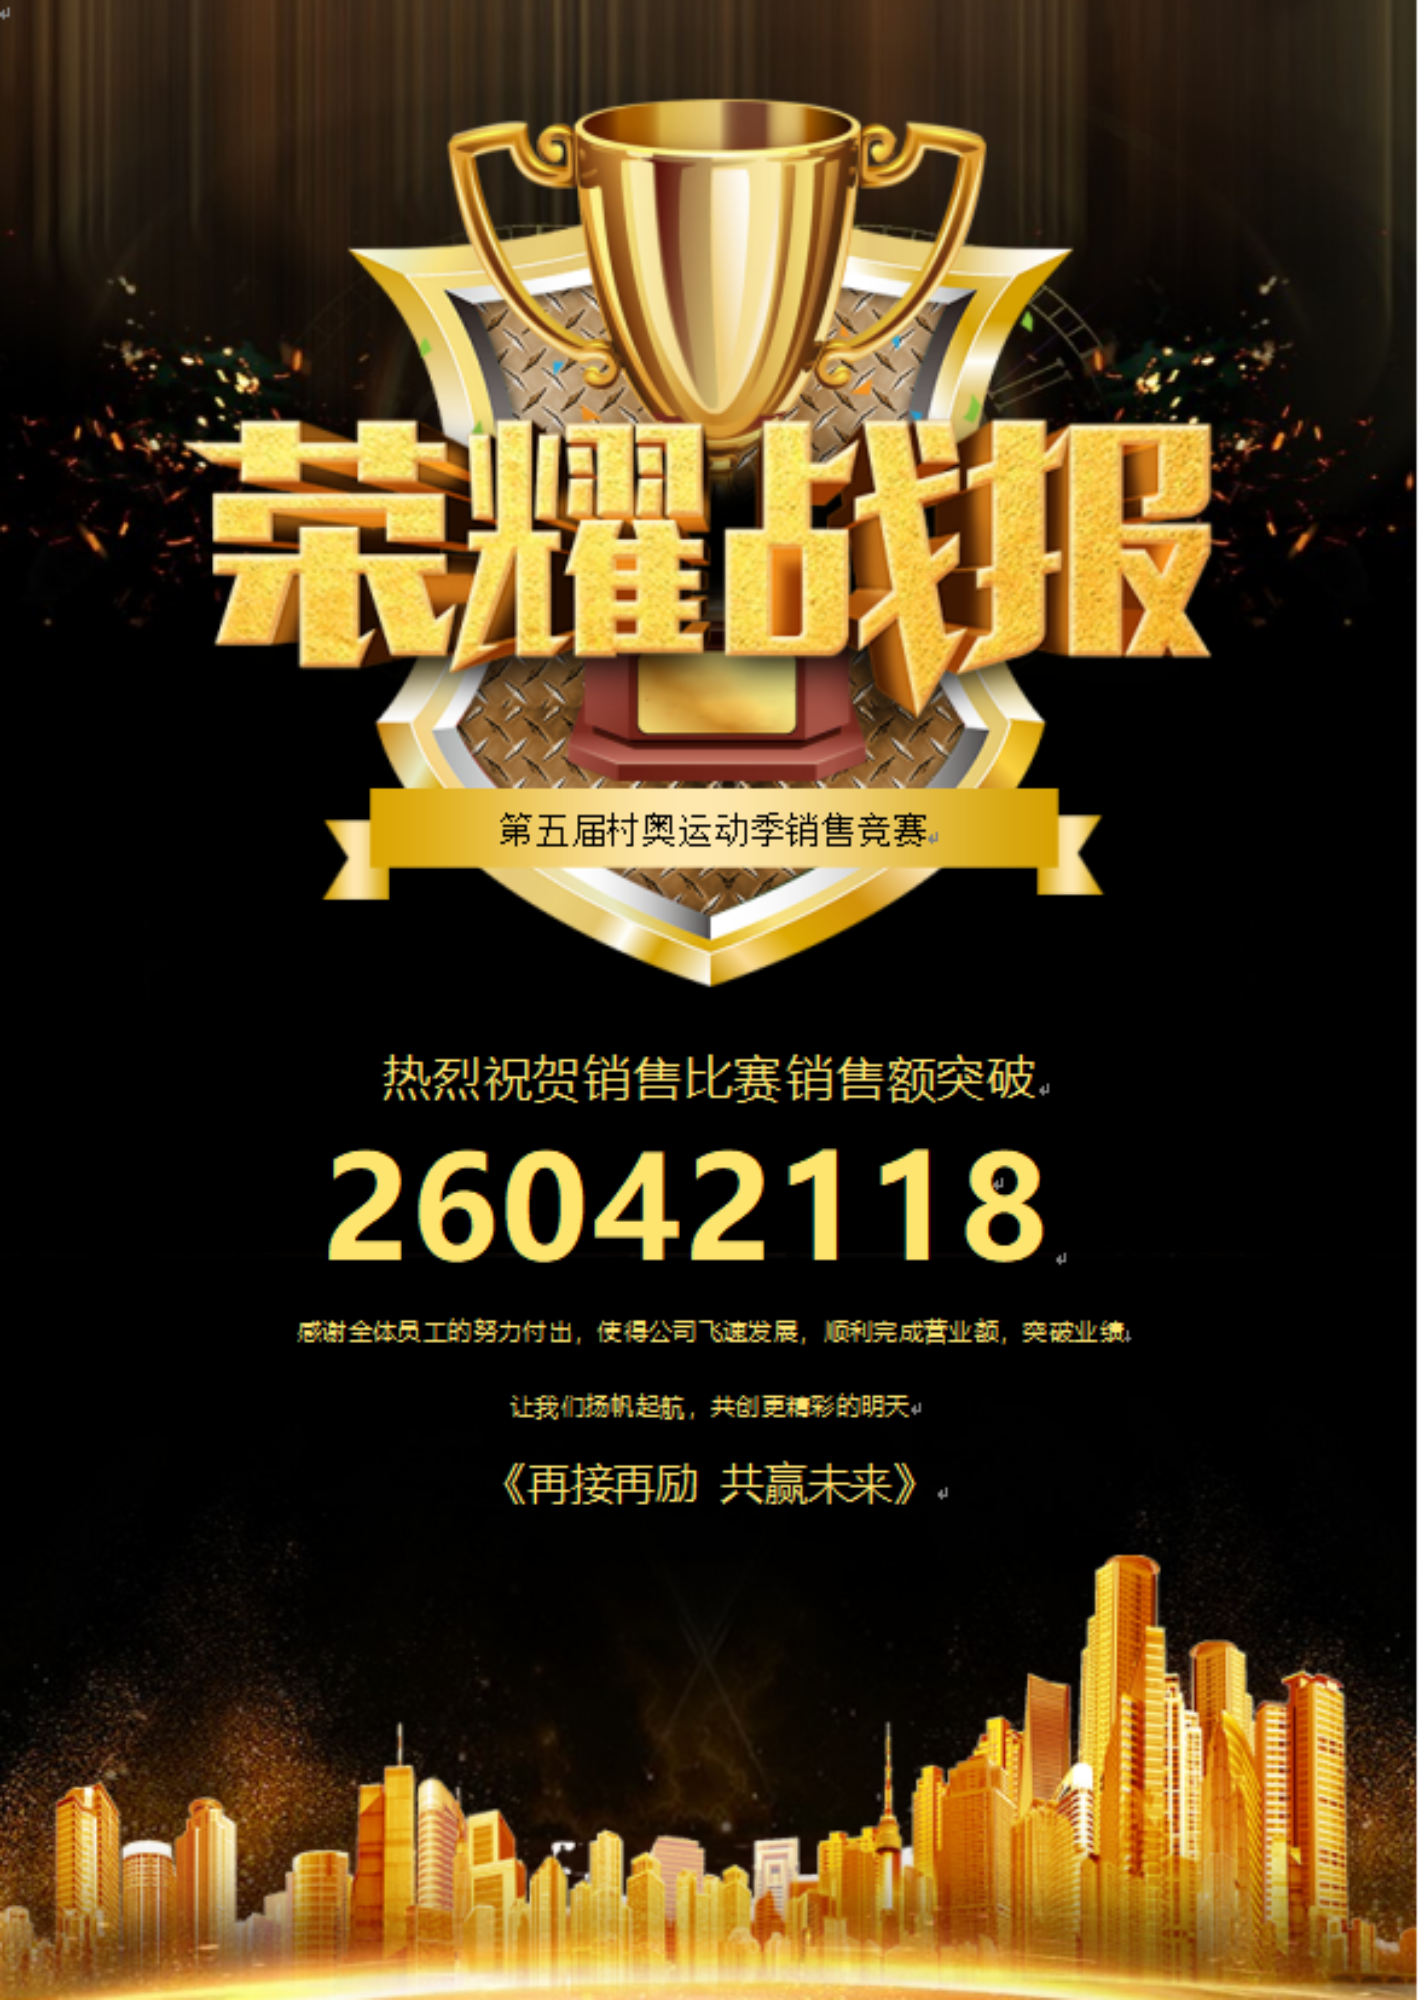 ROEASY fulfill the sale performance 26042118RMB during the ROEASY team competition during last 45 days